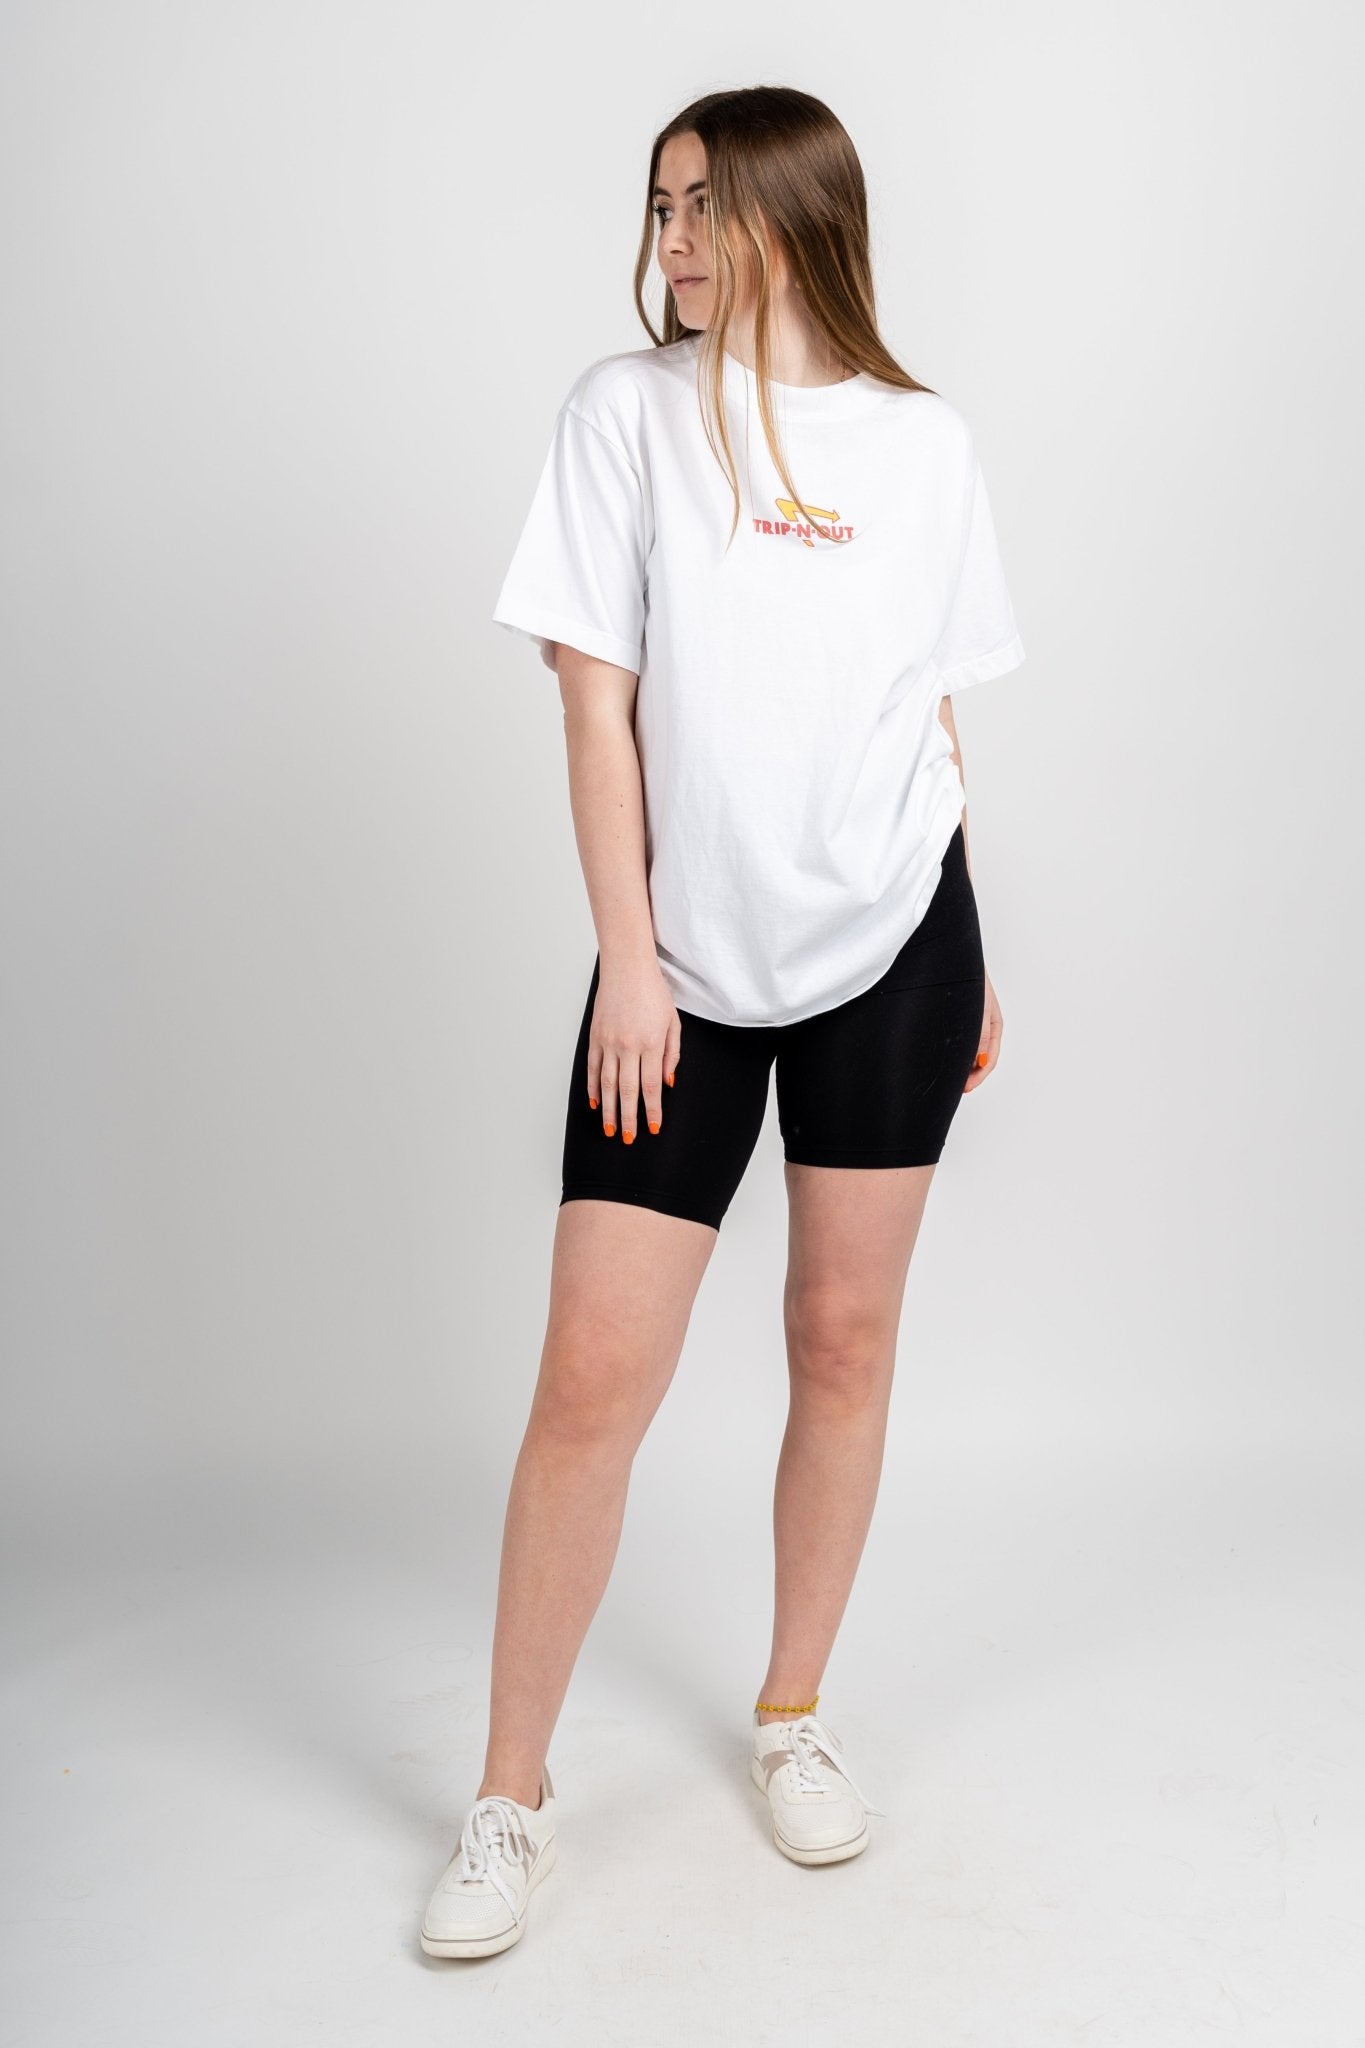 Trip N Out oversized graphic tee off white